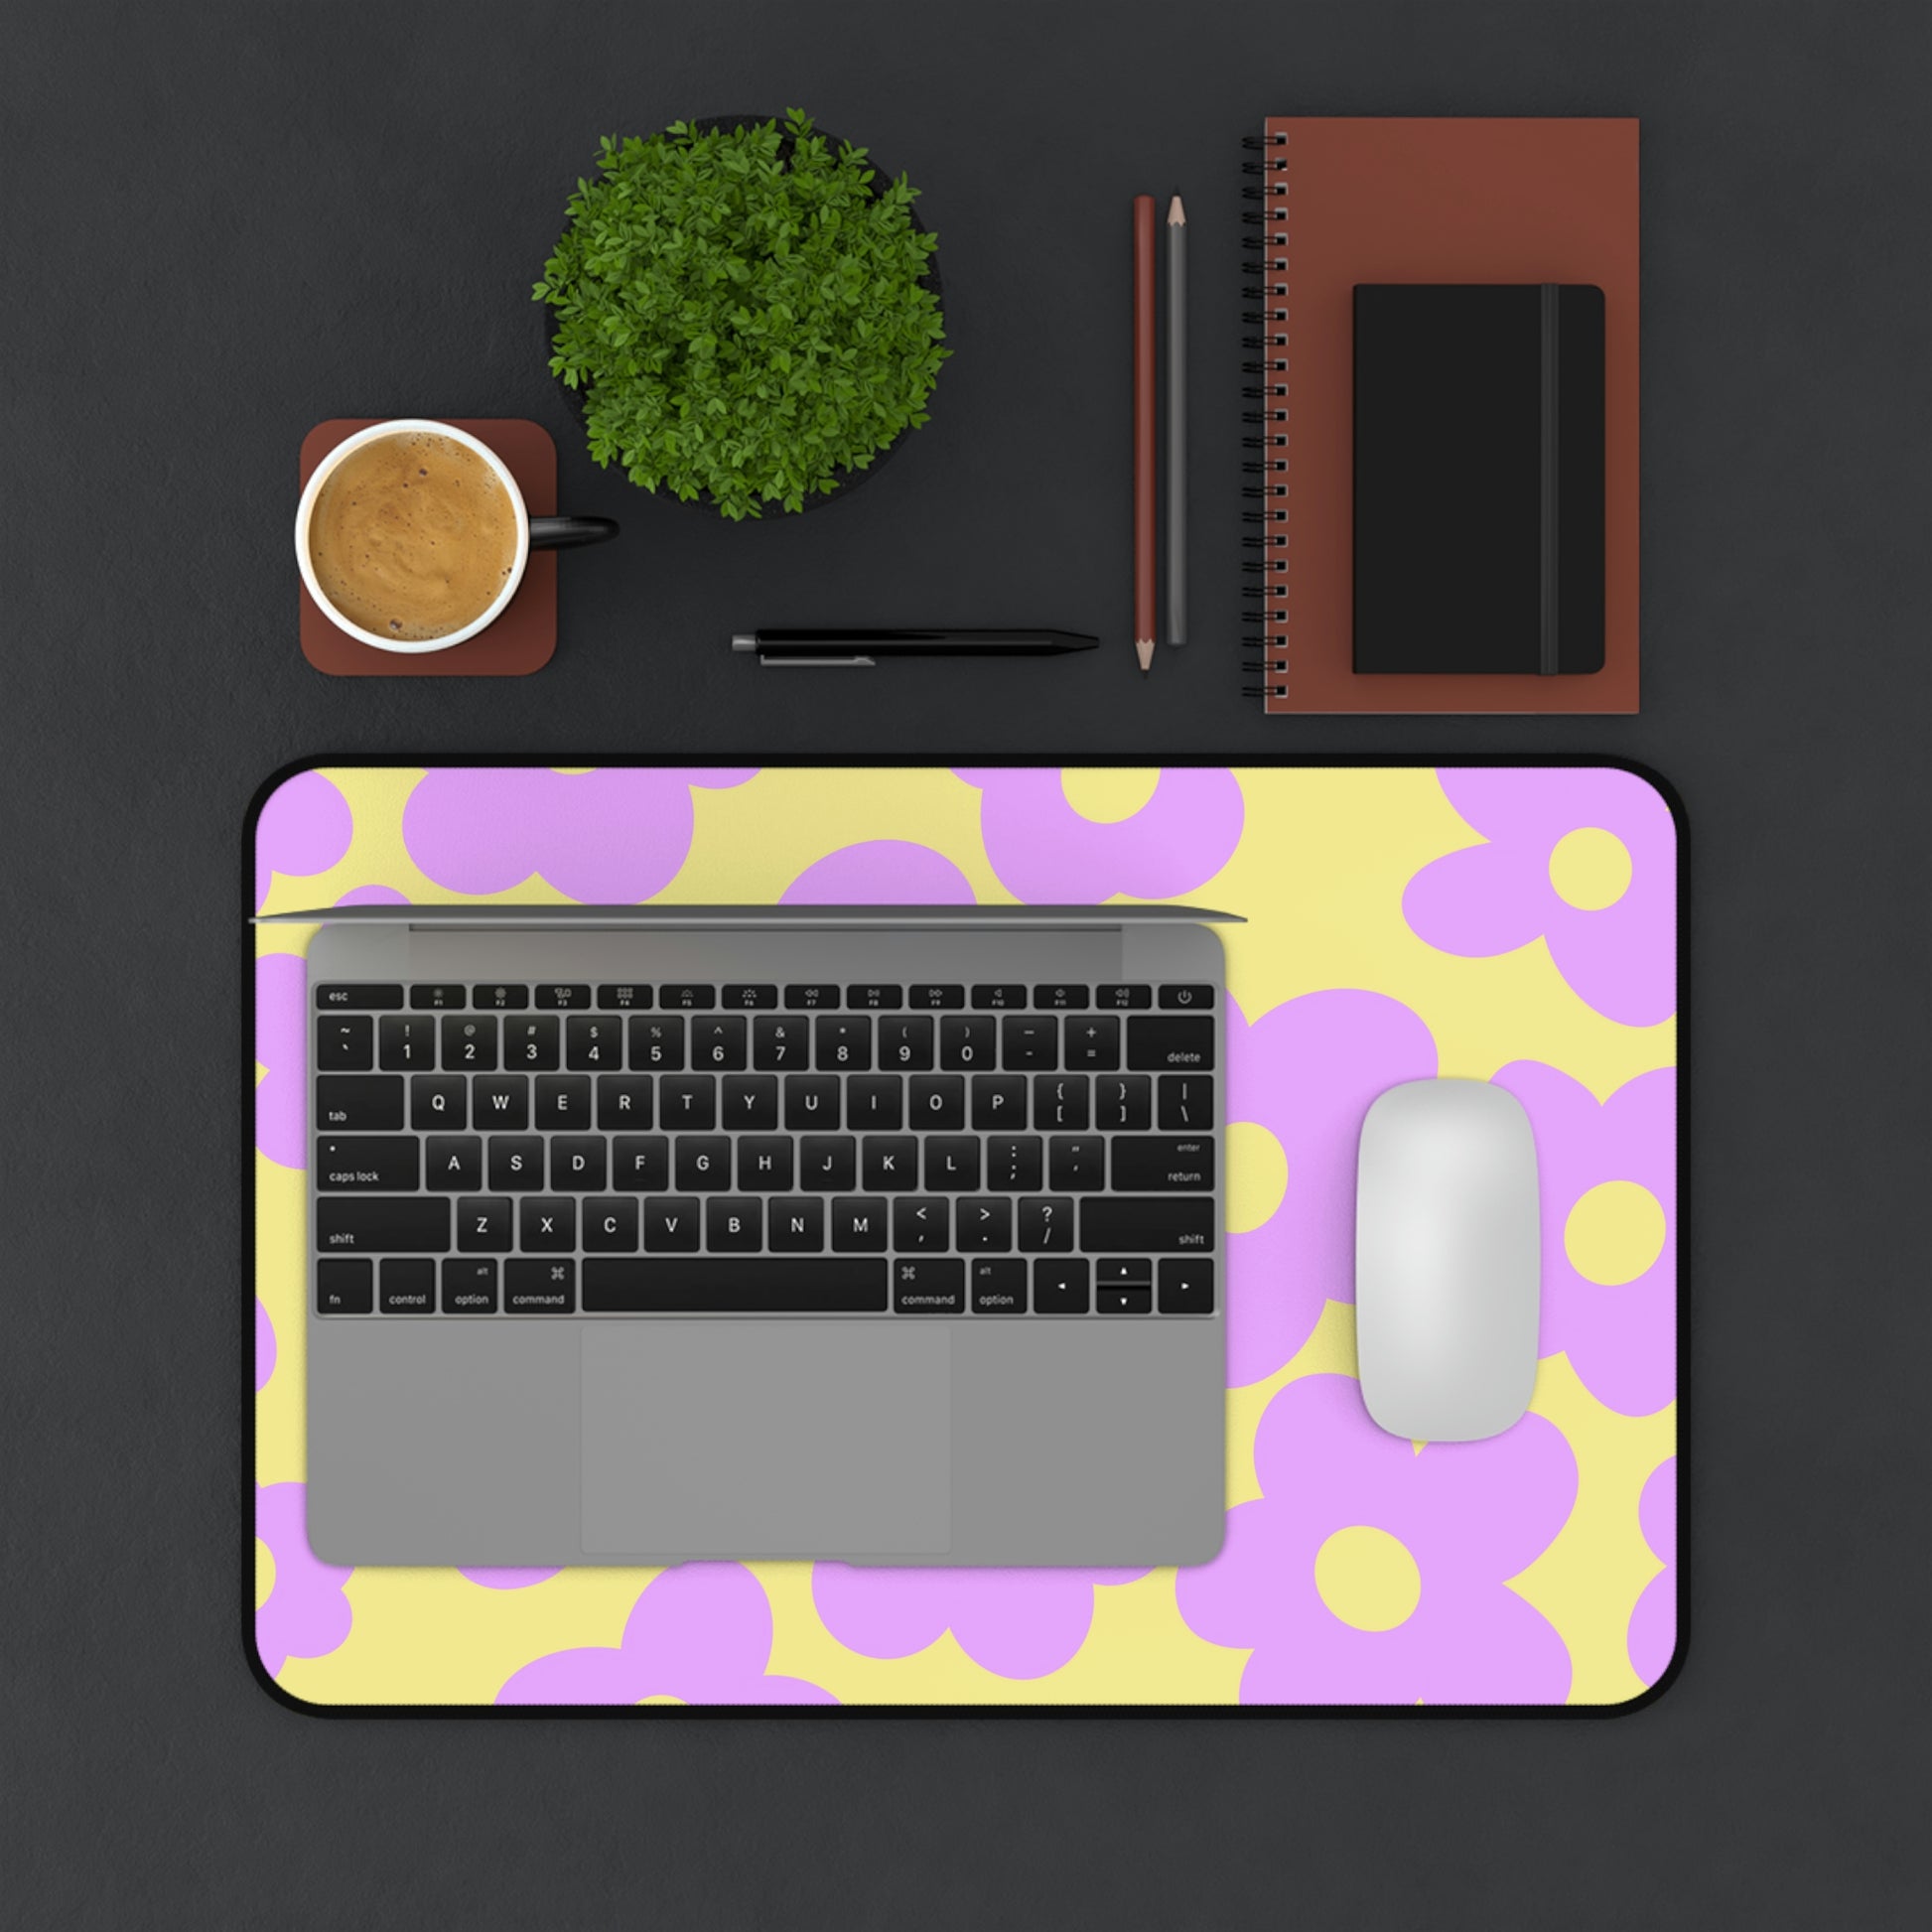 A 12" x 18" desk mat with purple flowers on a yellow background. A laptop and mouse sit on top of it.